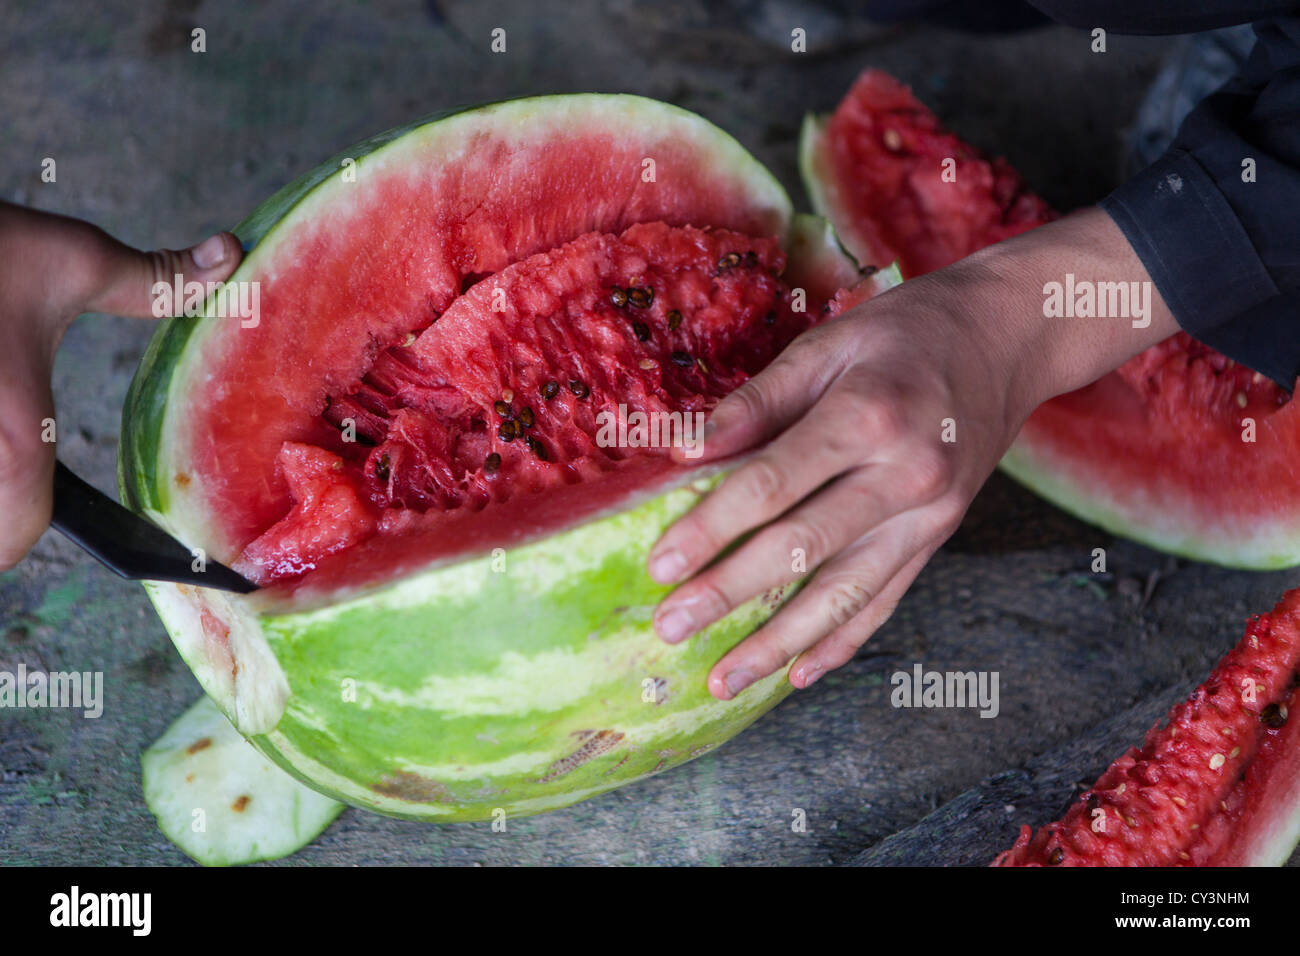 Afghans eating a water-melon Stock Photo